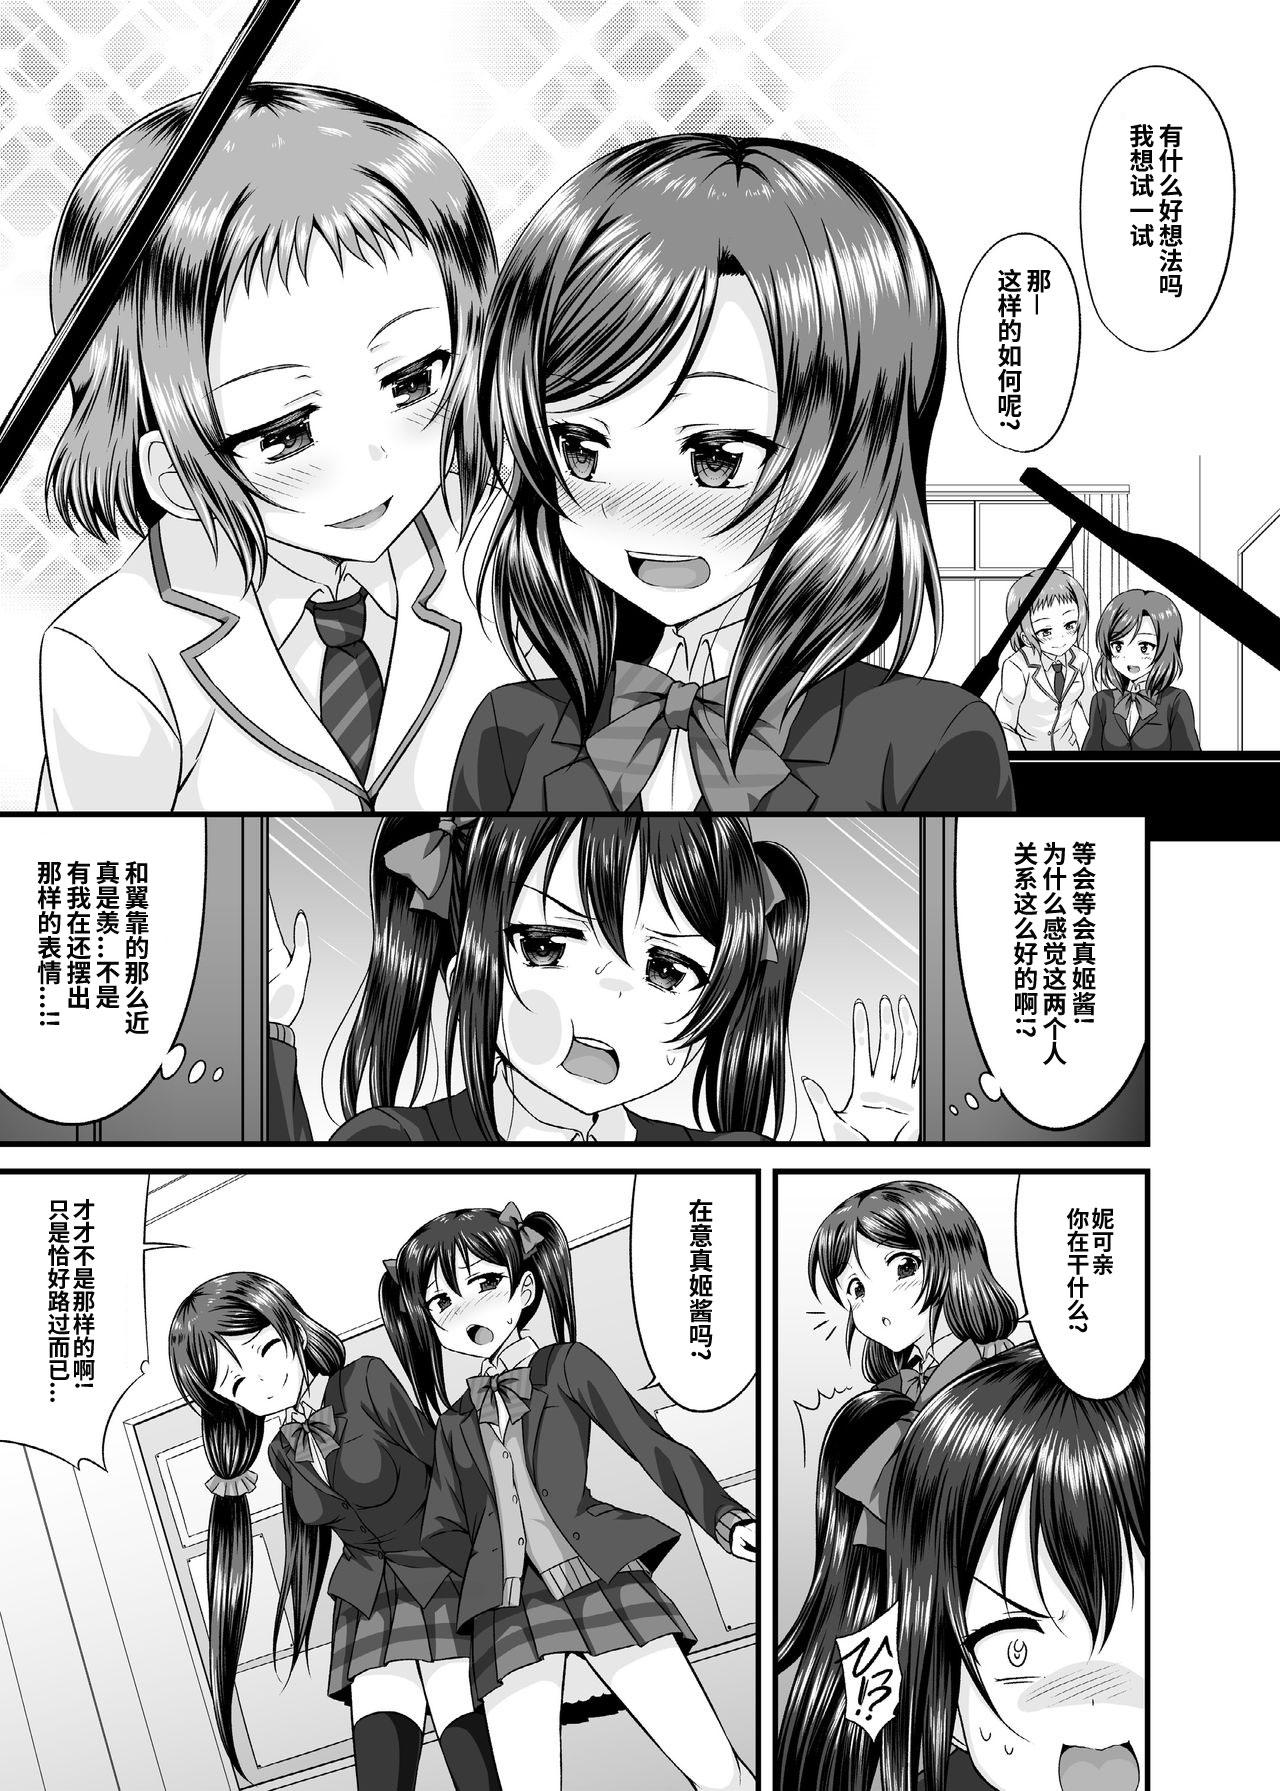 Perfect Tits Magnetic Love - Love live Romance - Page 3